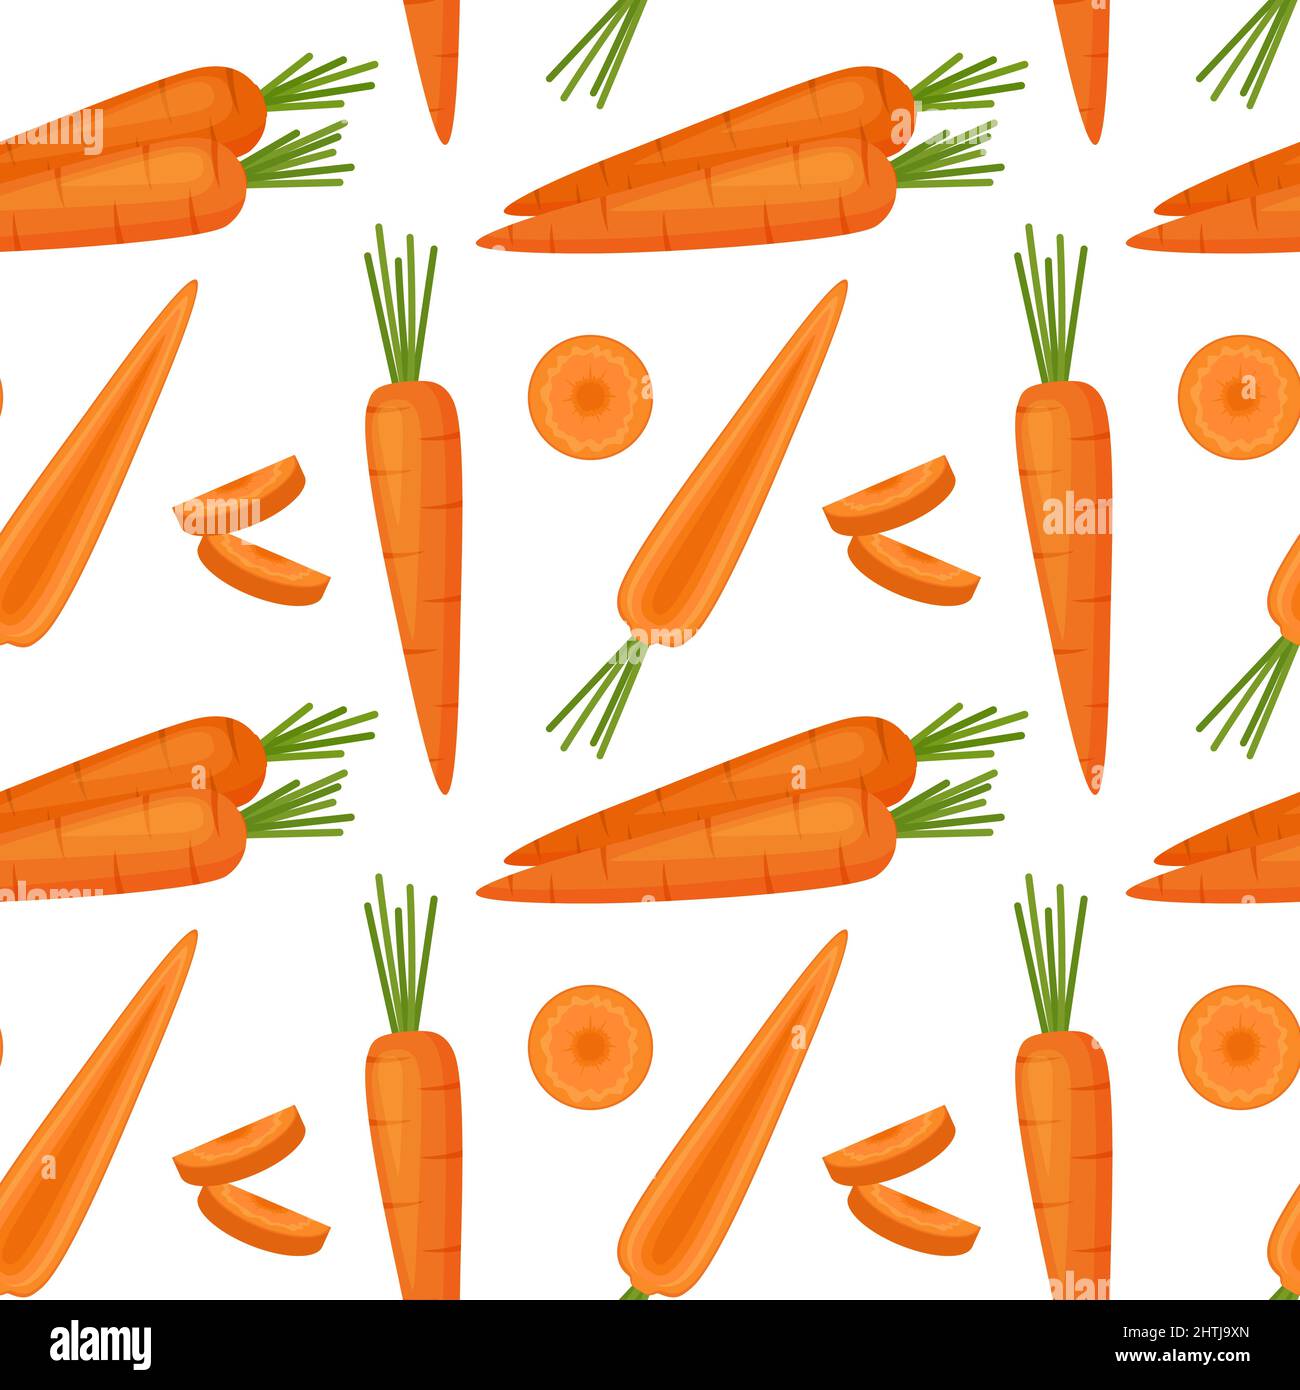 Seamless pattern with carrots. Carrot background, vector illustration Stock Vector